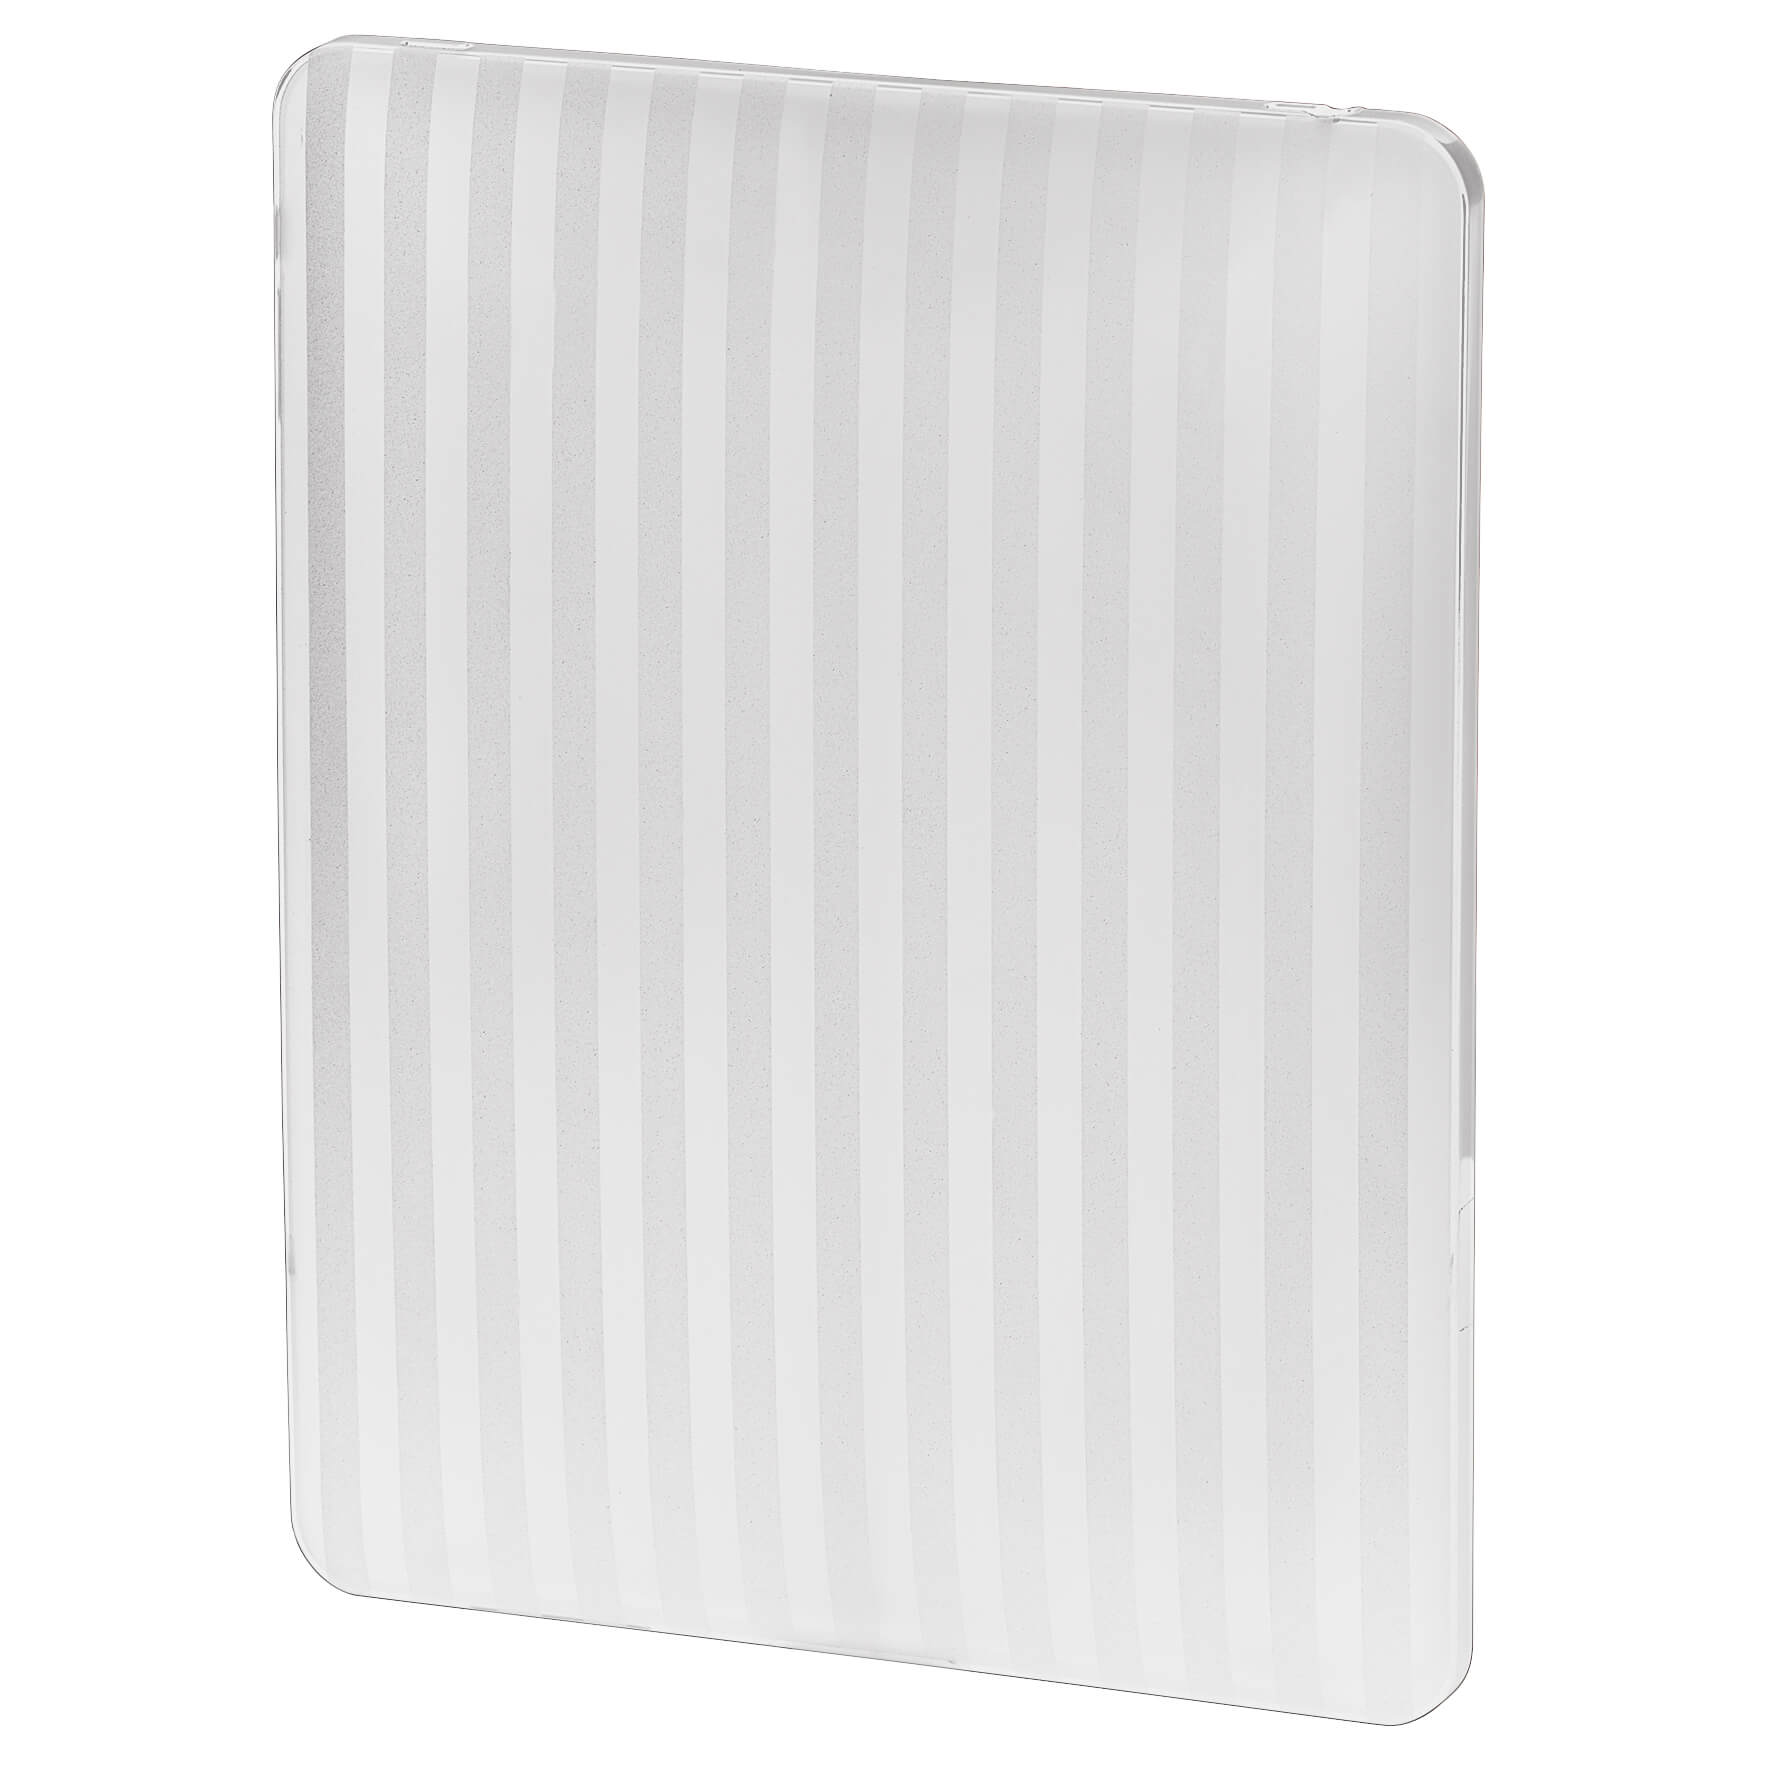 Stripes Cover for iPad 2/3rd/ 4th Generation, white